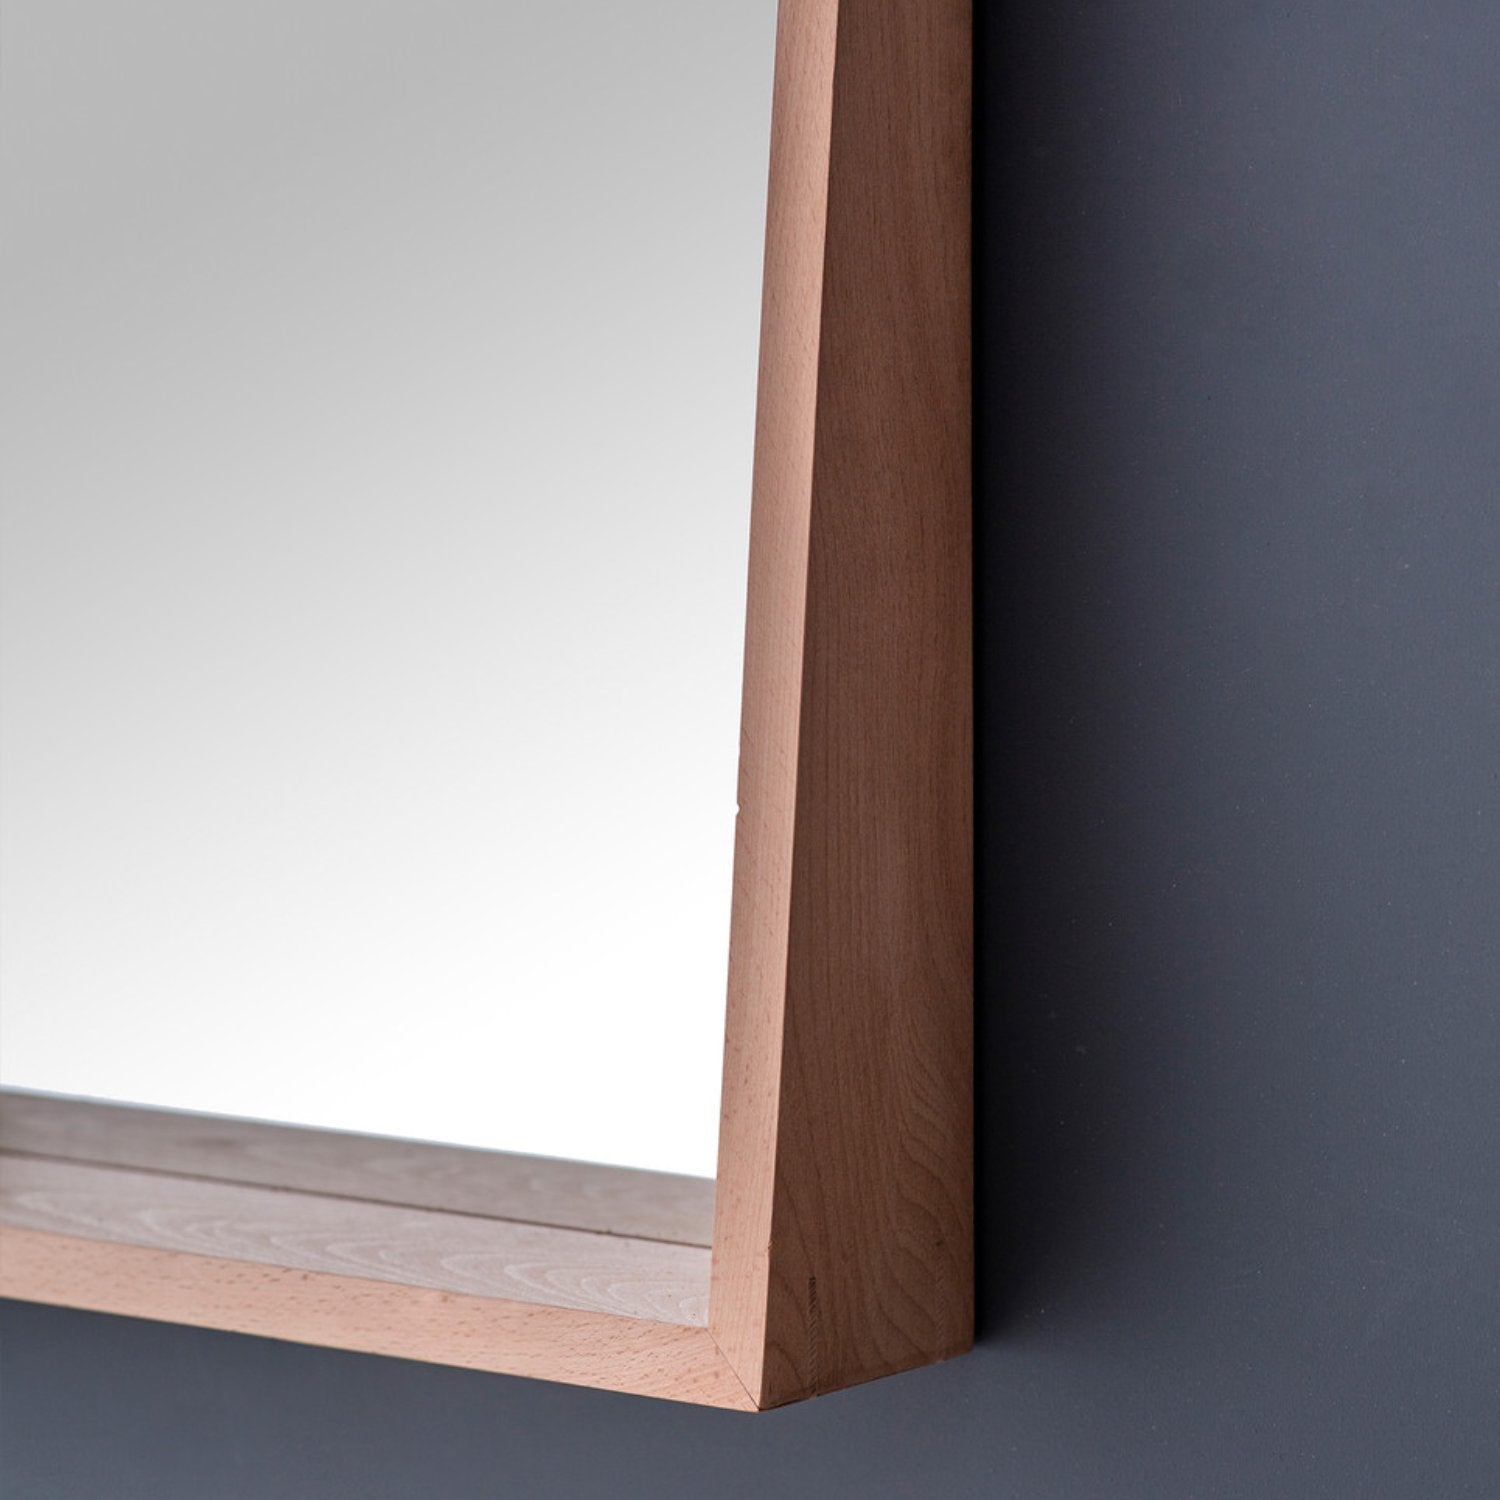 Southbourne Wall Mirror by Garden Trading - Beech